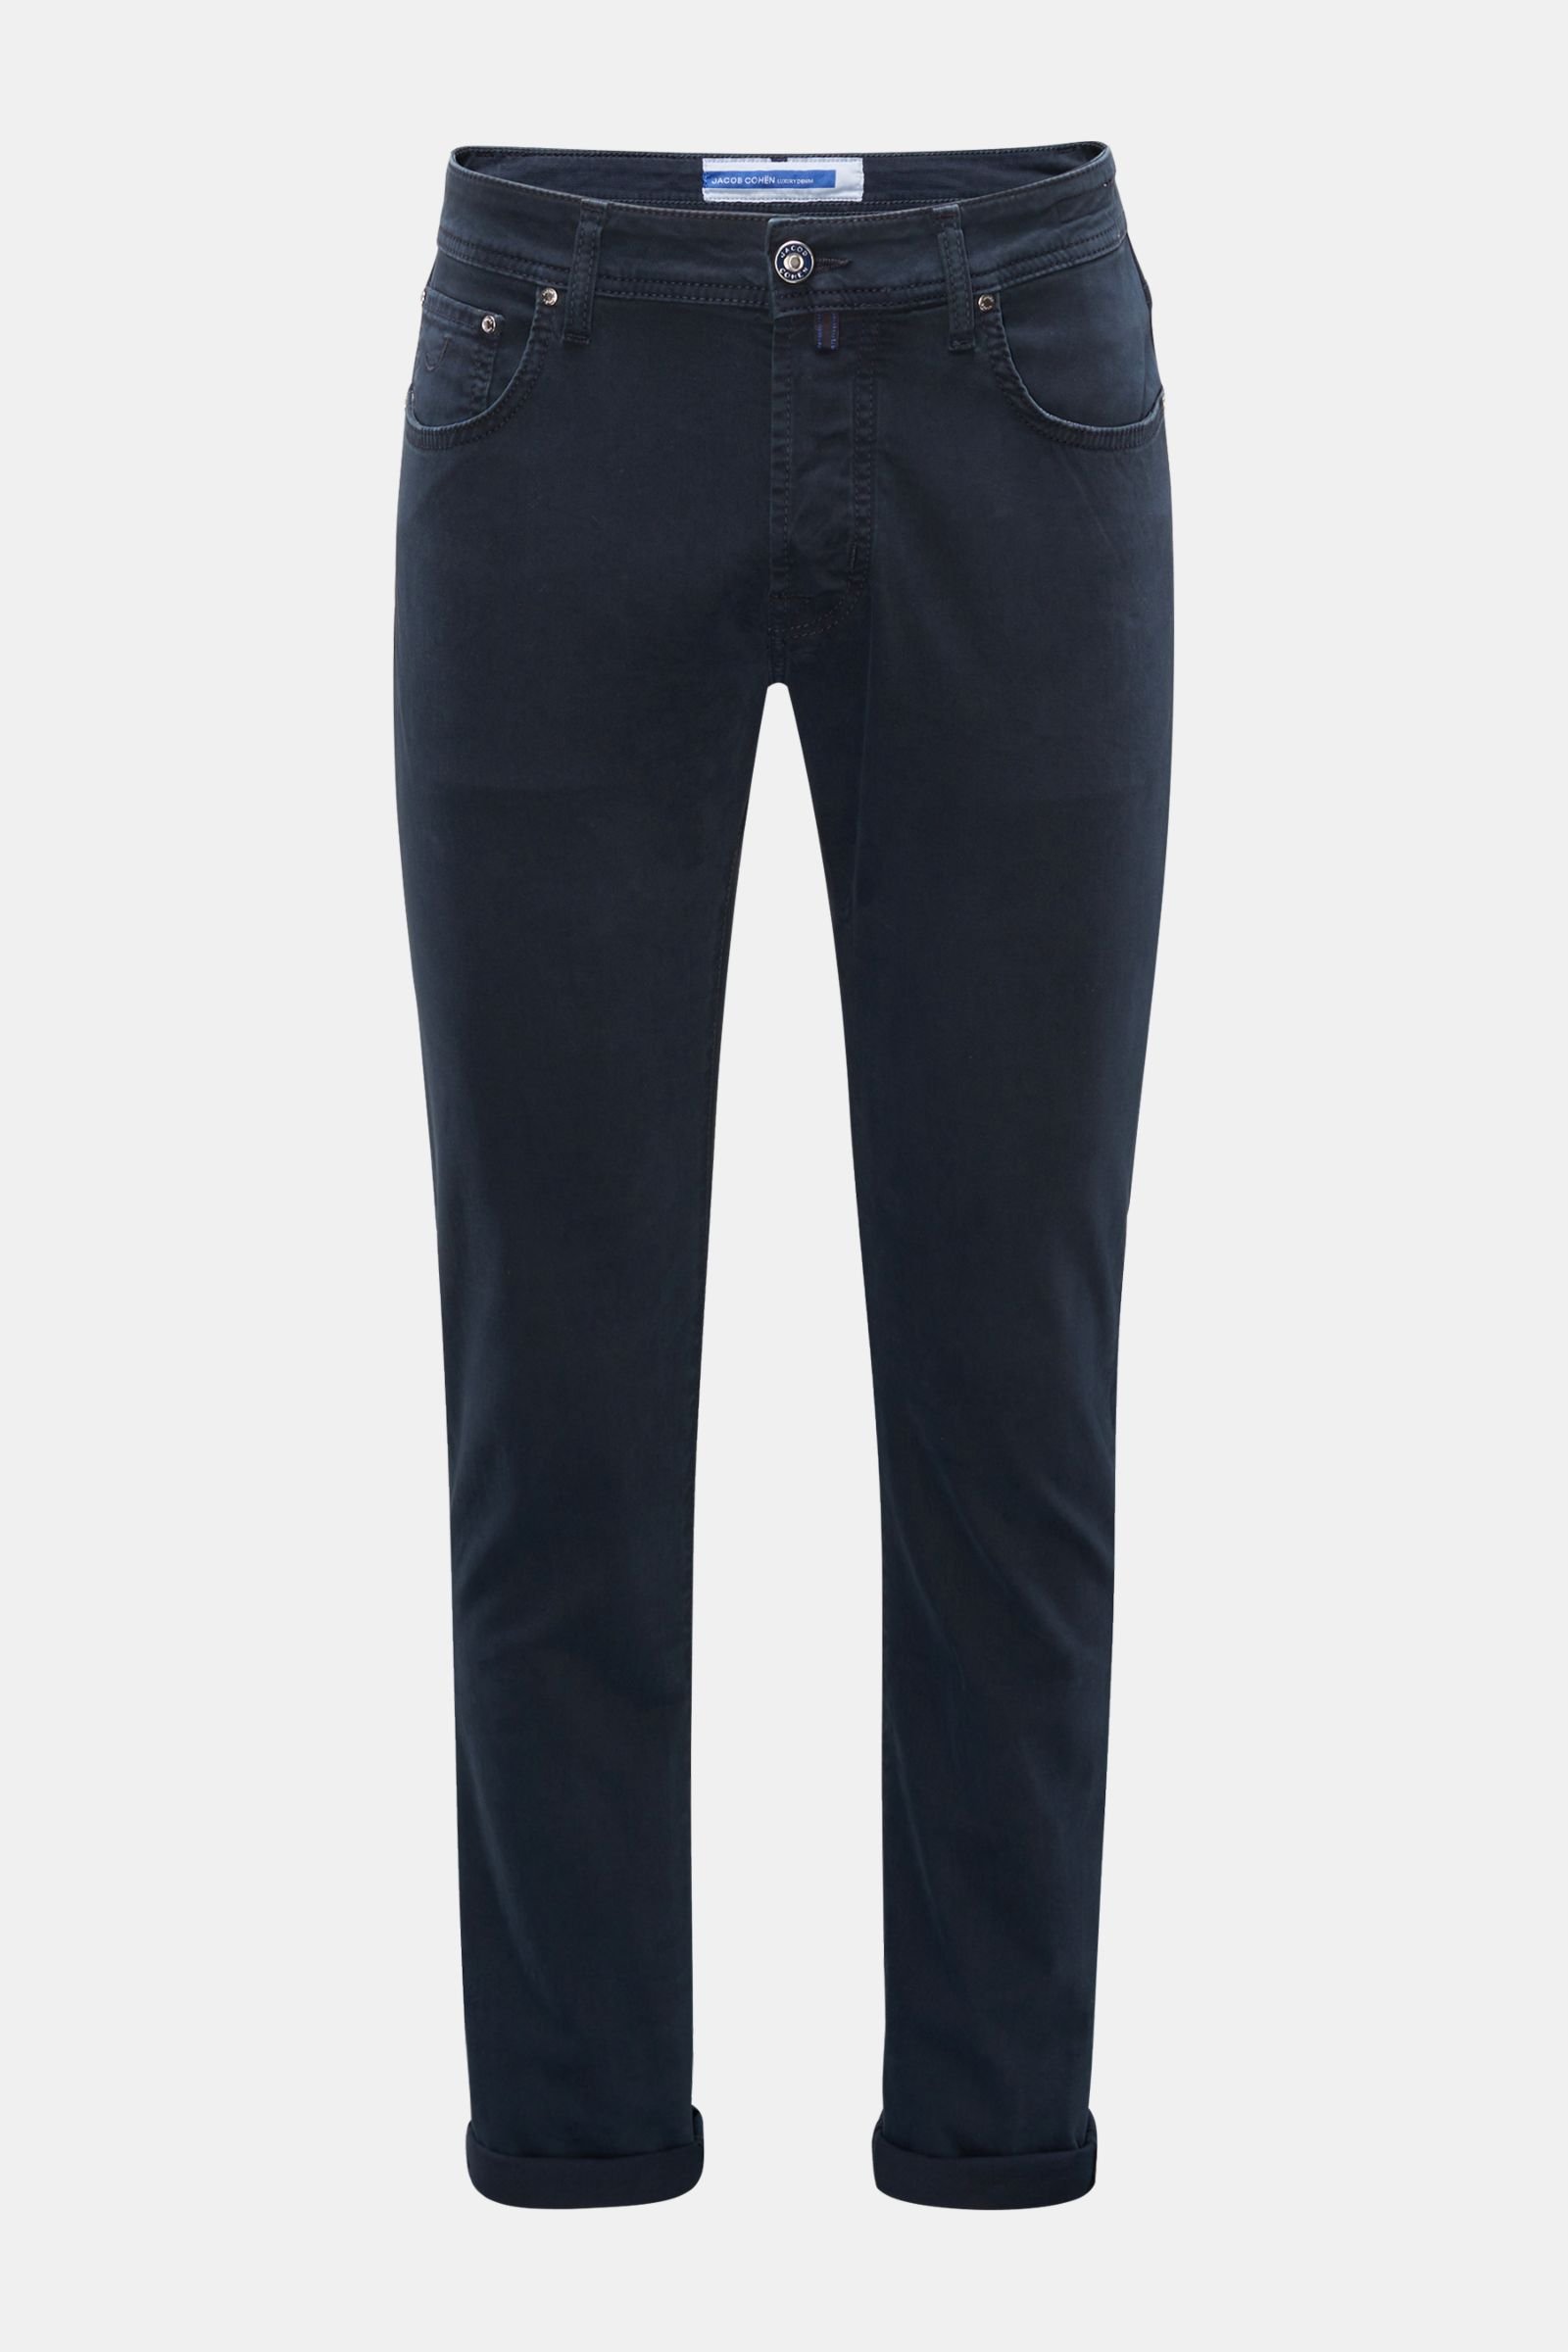 Cotton trousers 'Bard' navy (previously J688)